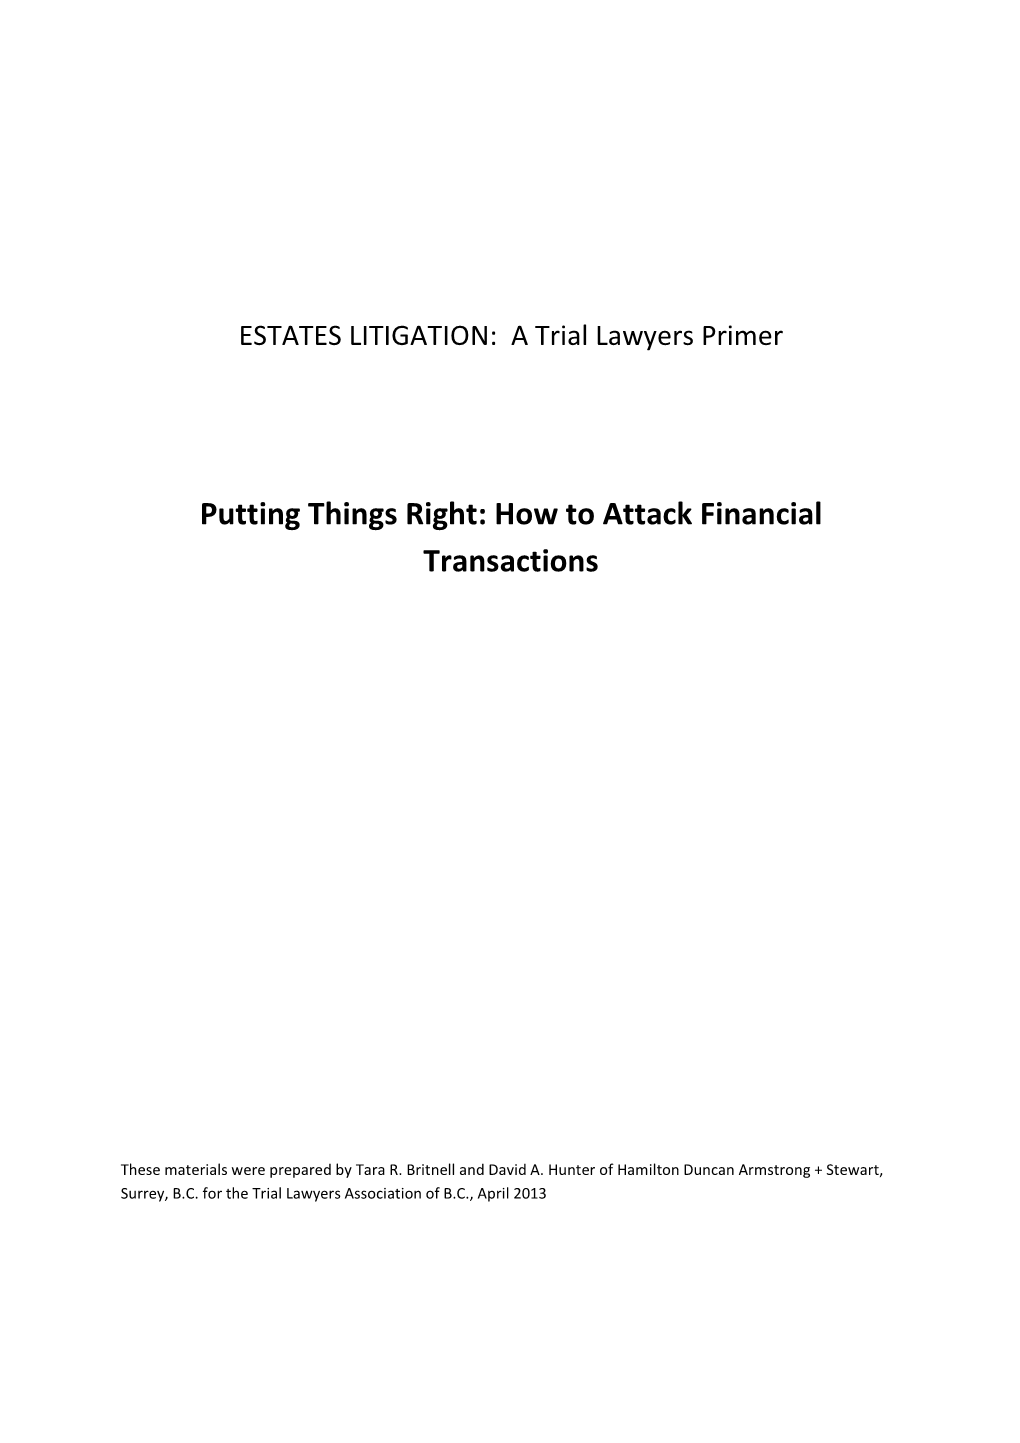 Putting Things Right: How to Attack Financial Transactions